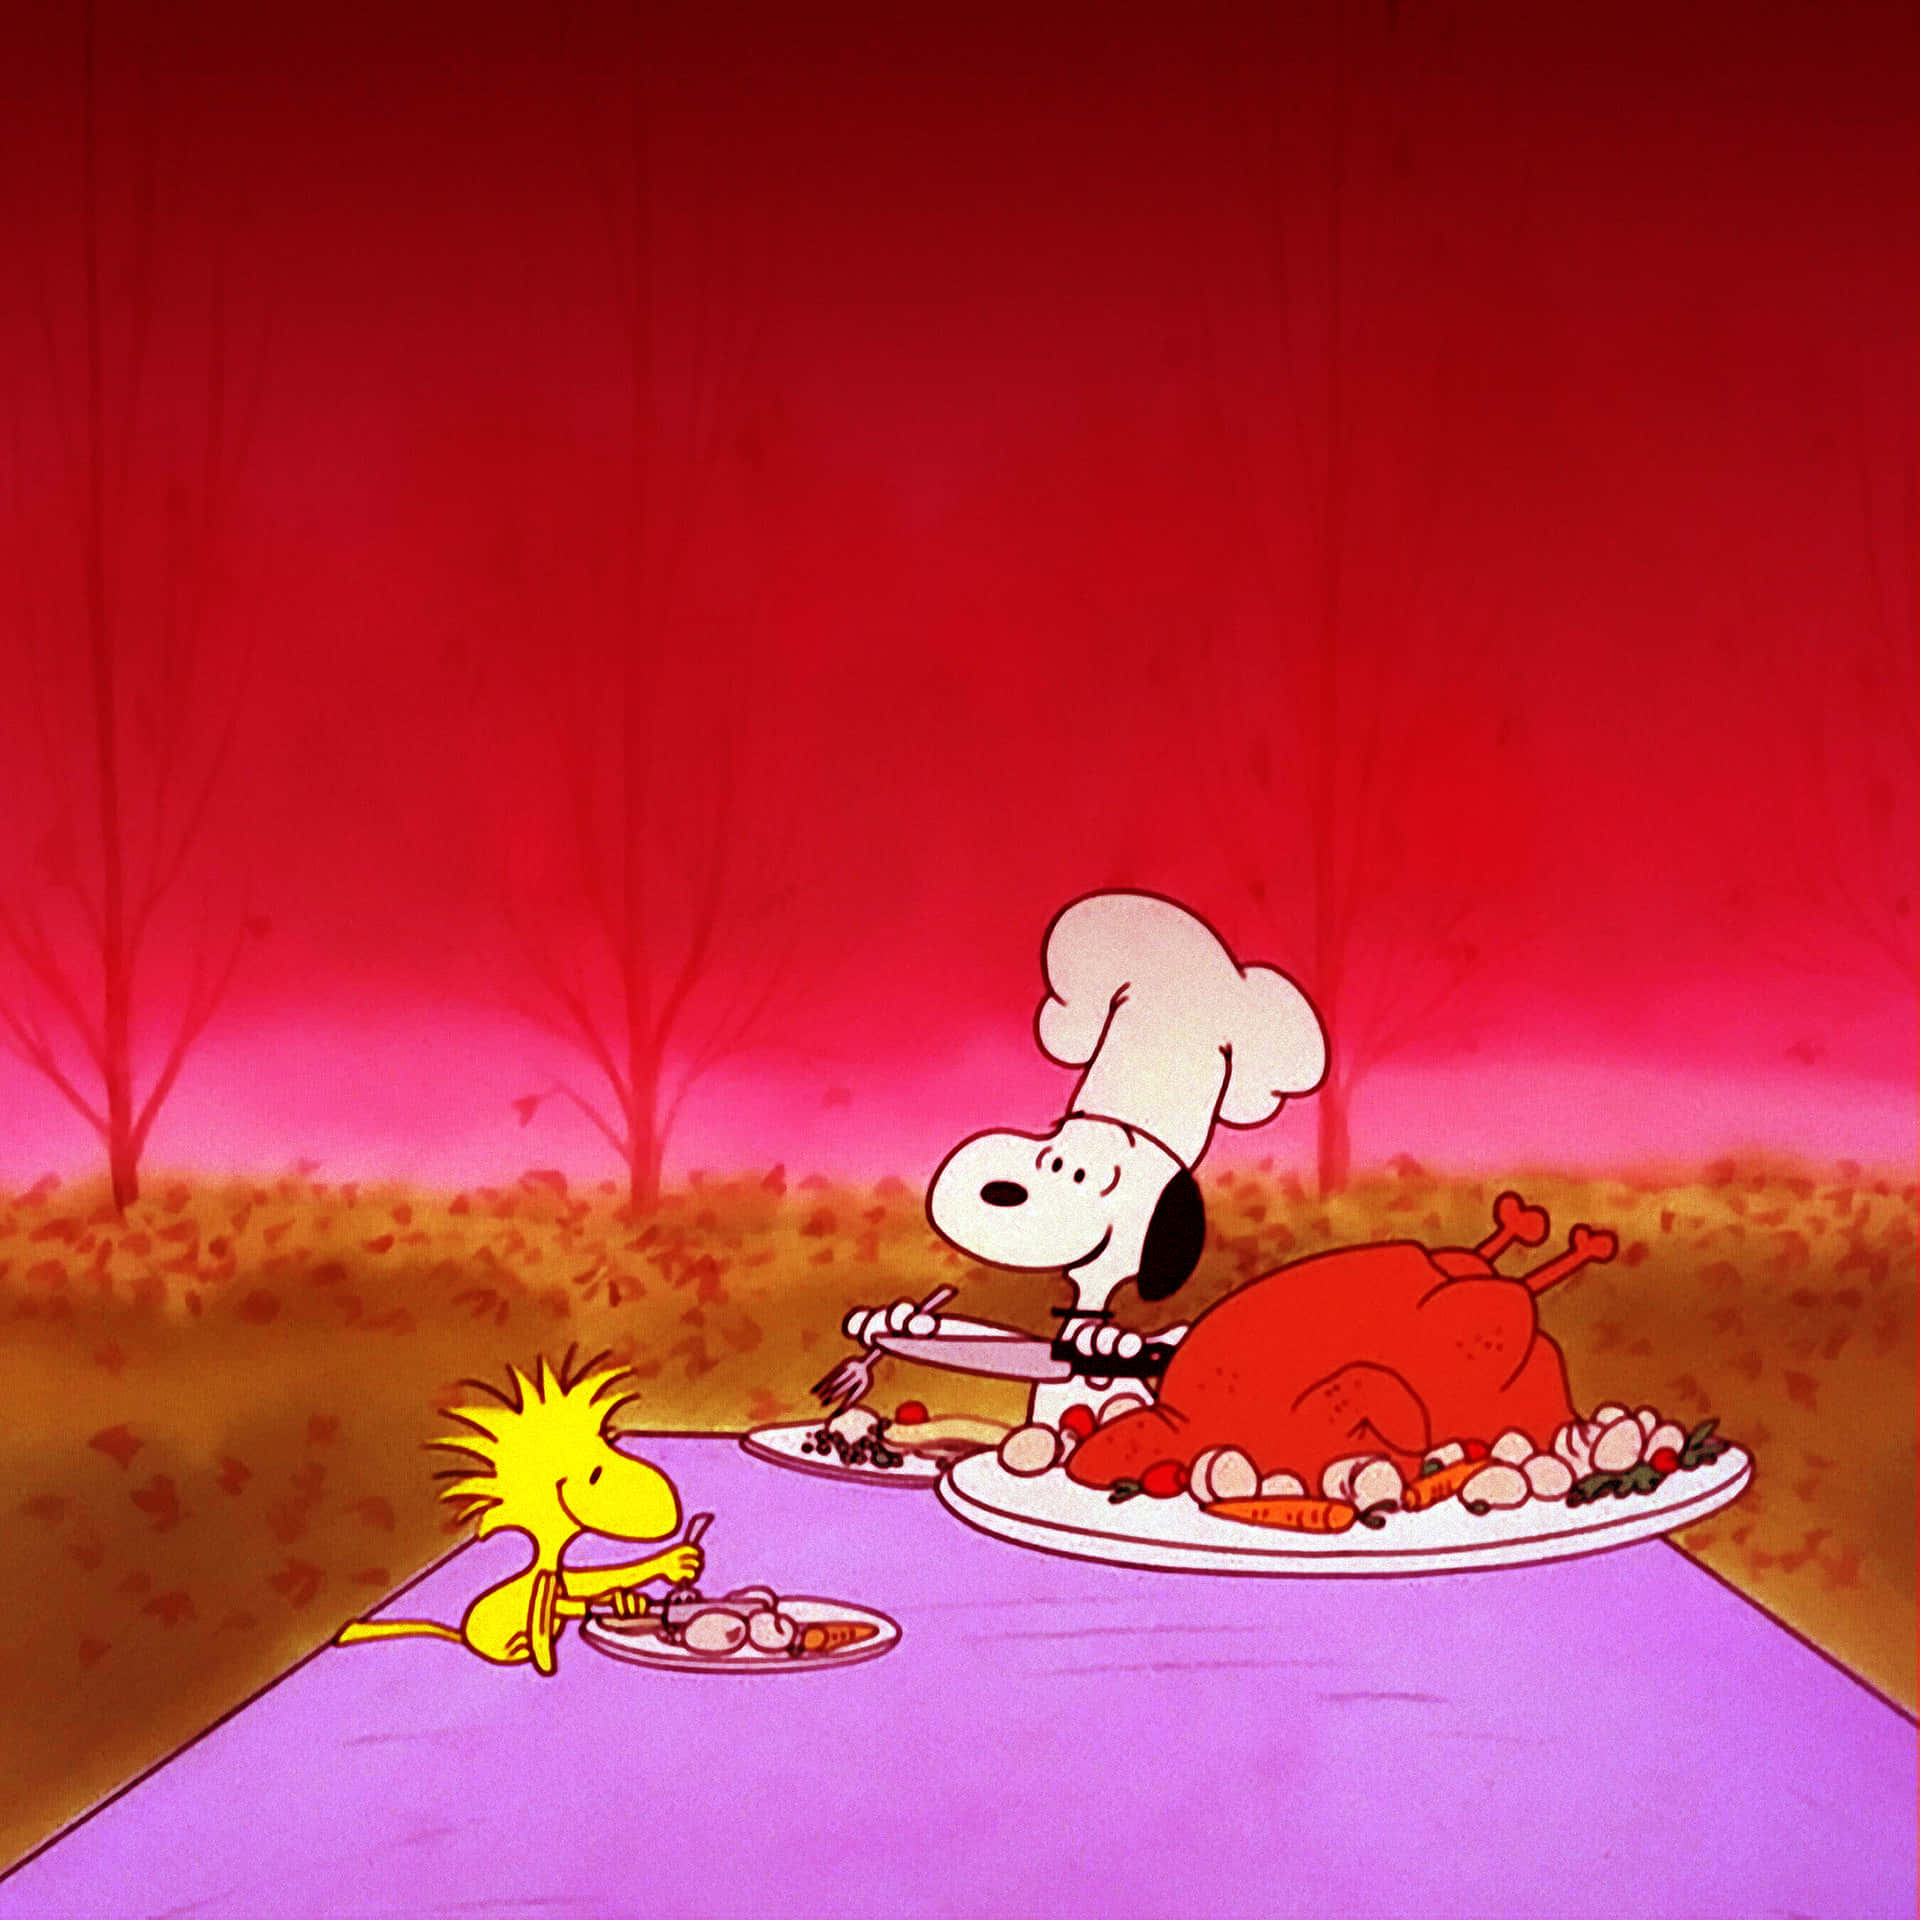 Snoopy Celebrating Thanksgiving With A Feast Background